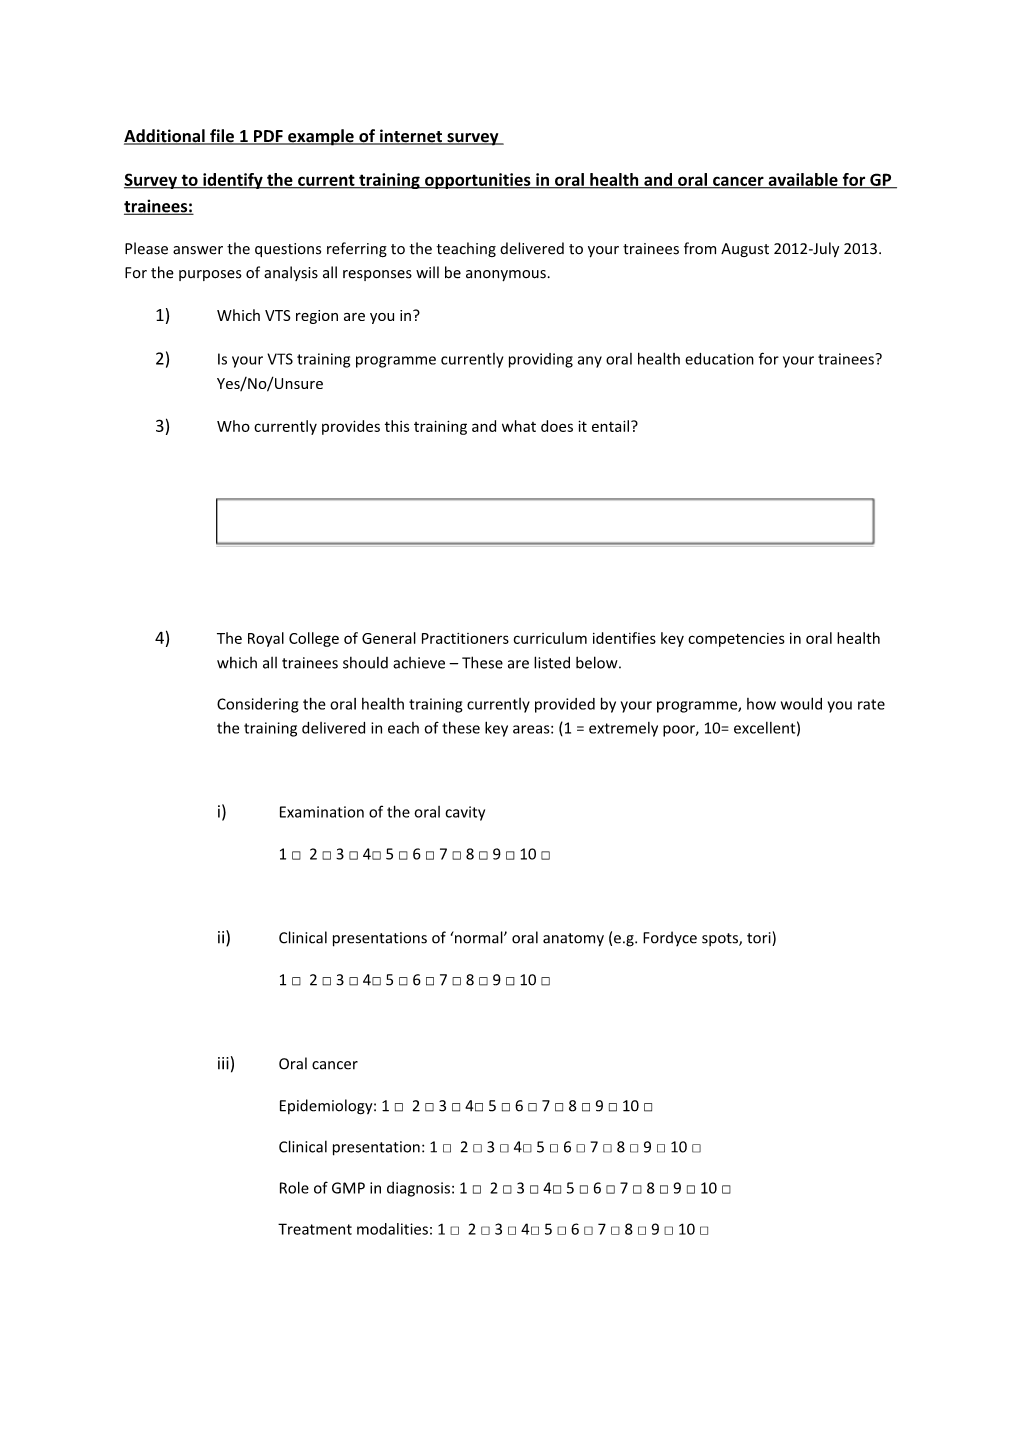 Additional File 1 PDF Example of Internet Survey